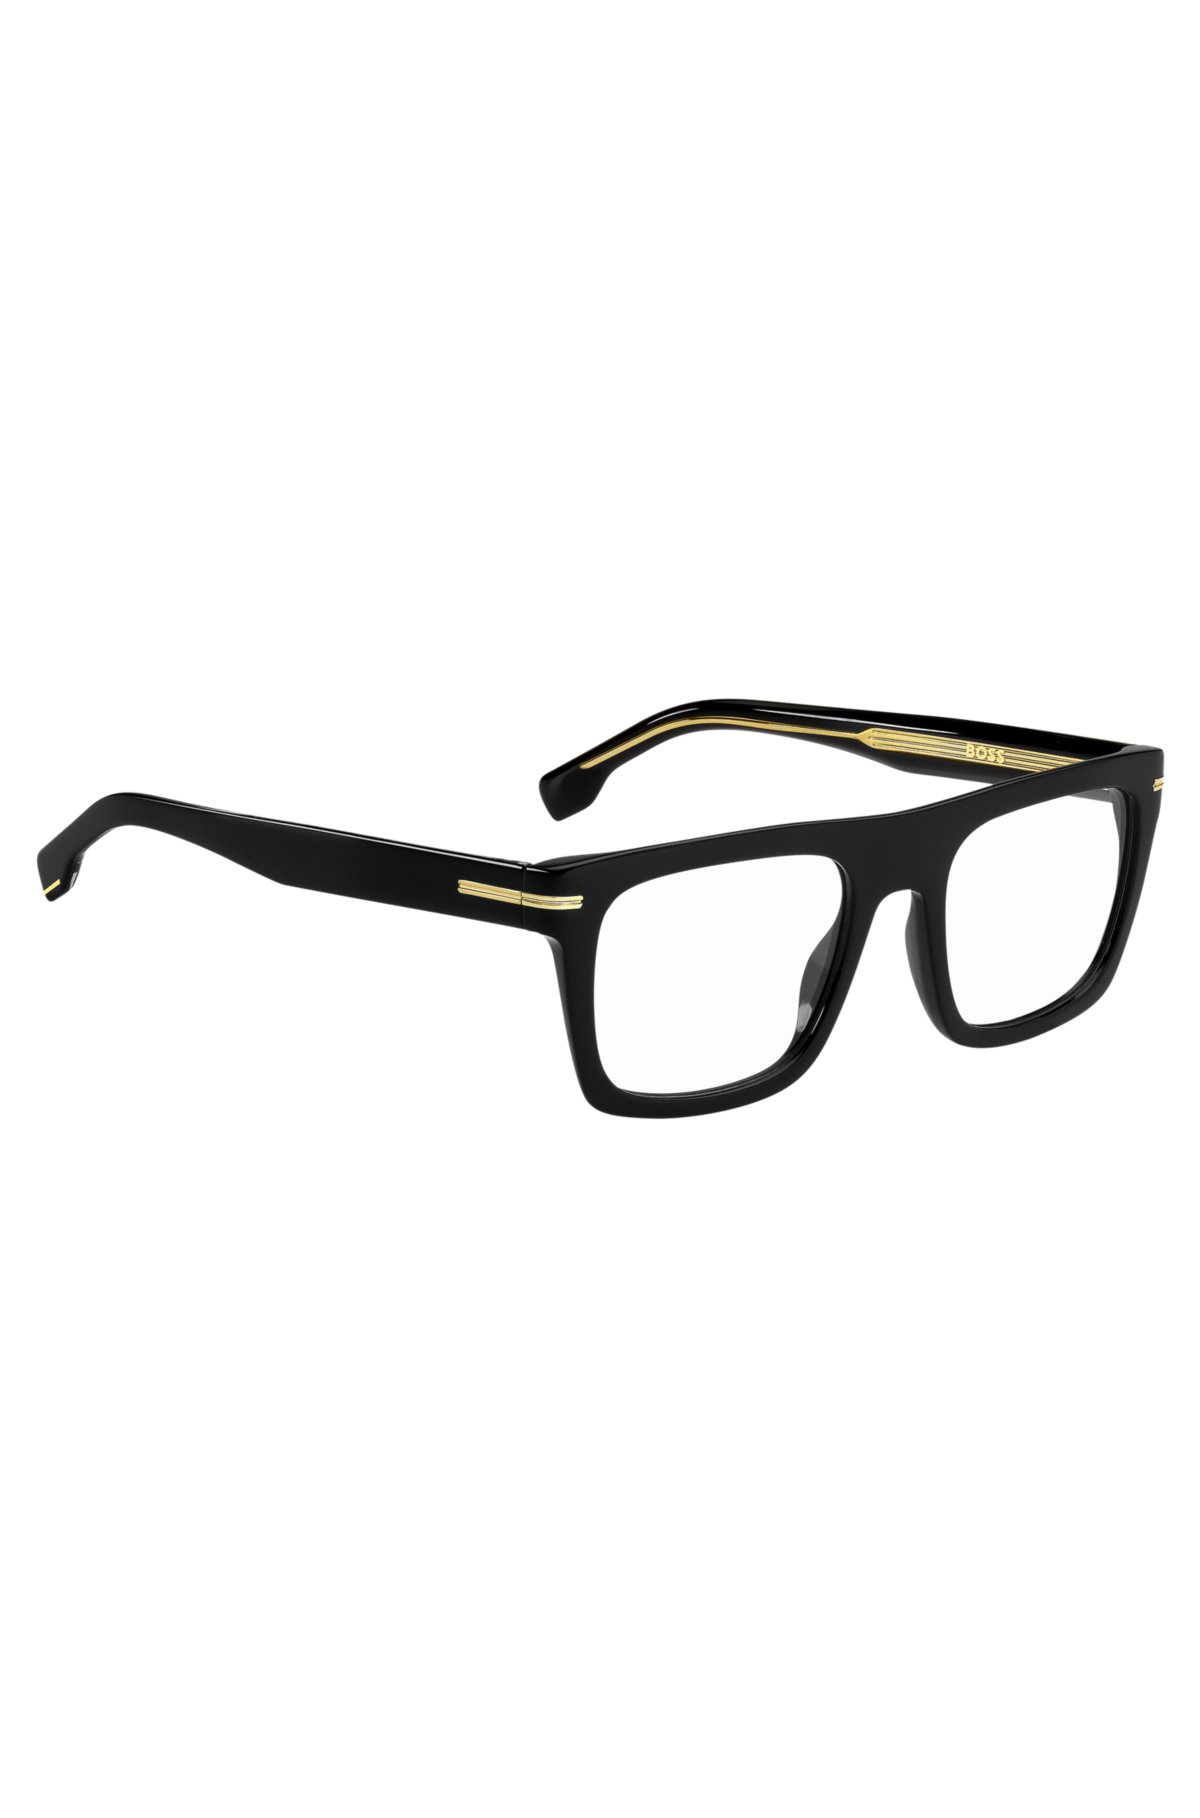 BOSS - Black-acetate optical frames with gold-tone details